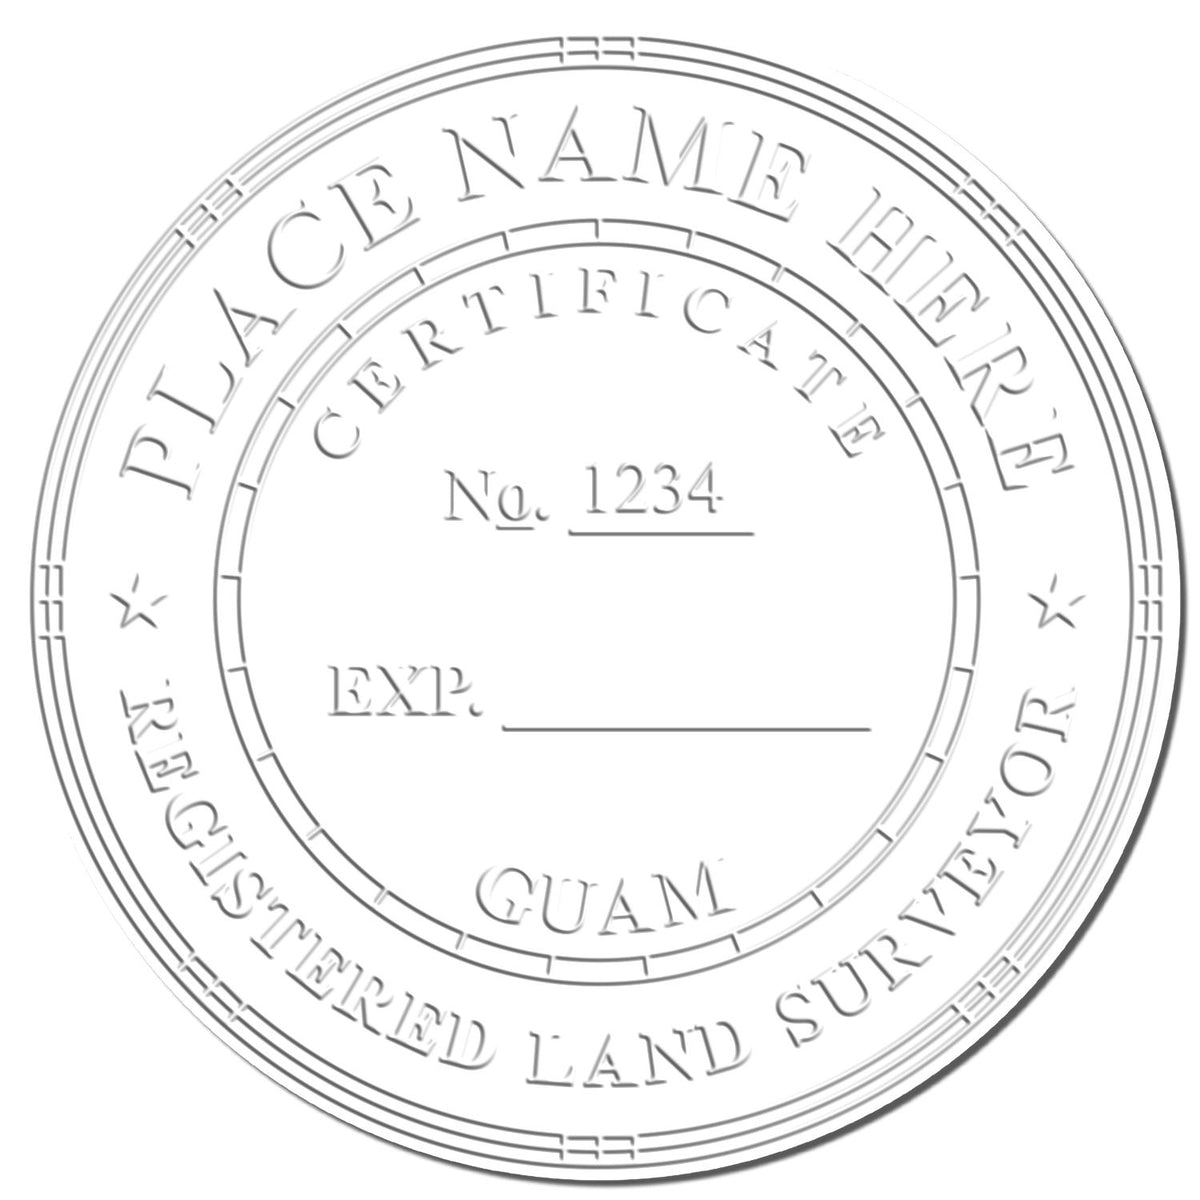 This paper is stamped with a sample imprint of the Guam Desk Surveyor Seal Embosser, signifying its quality and reliability.